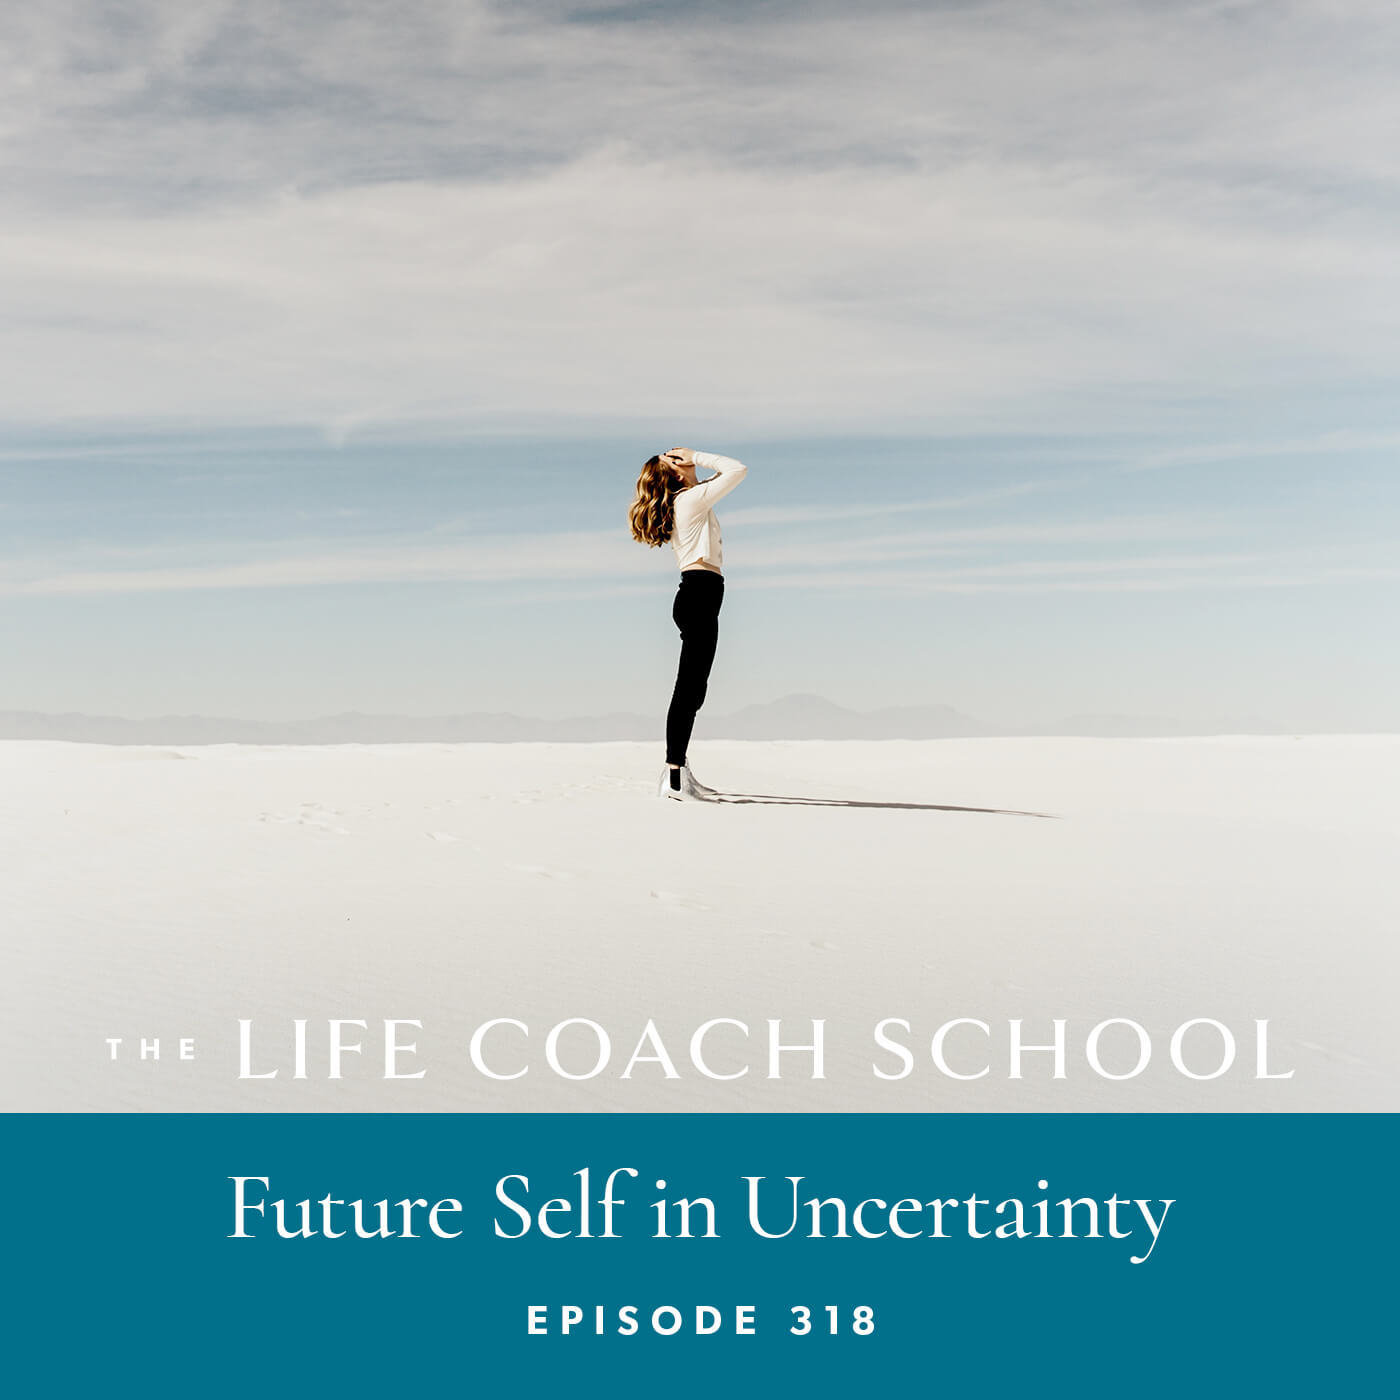 The Life Coach School Podcast with Brooke Castillo | Episode 318 | Future Self in Uncertainty